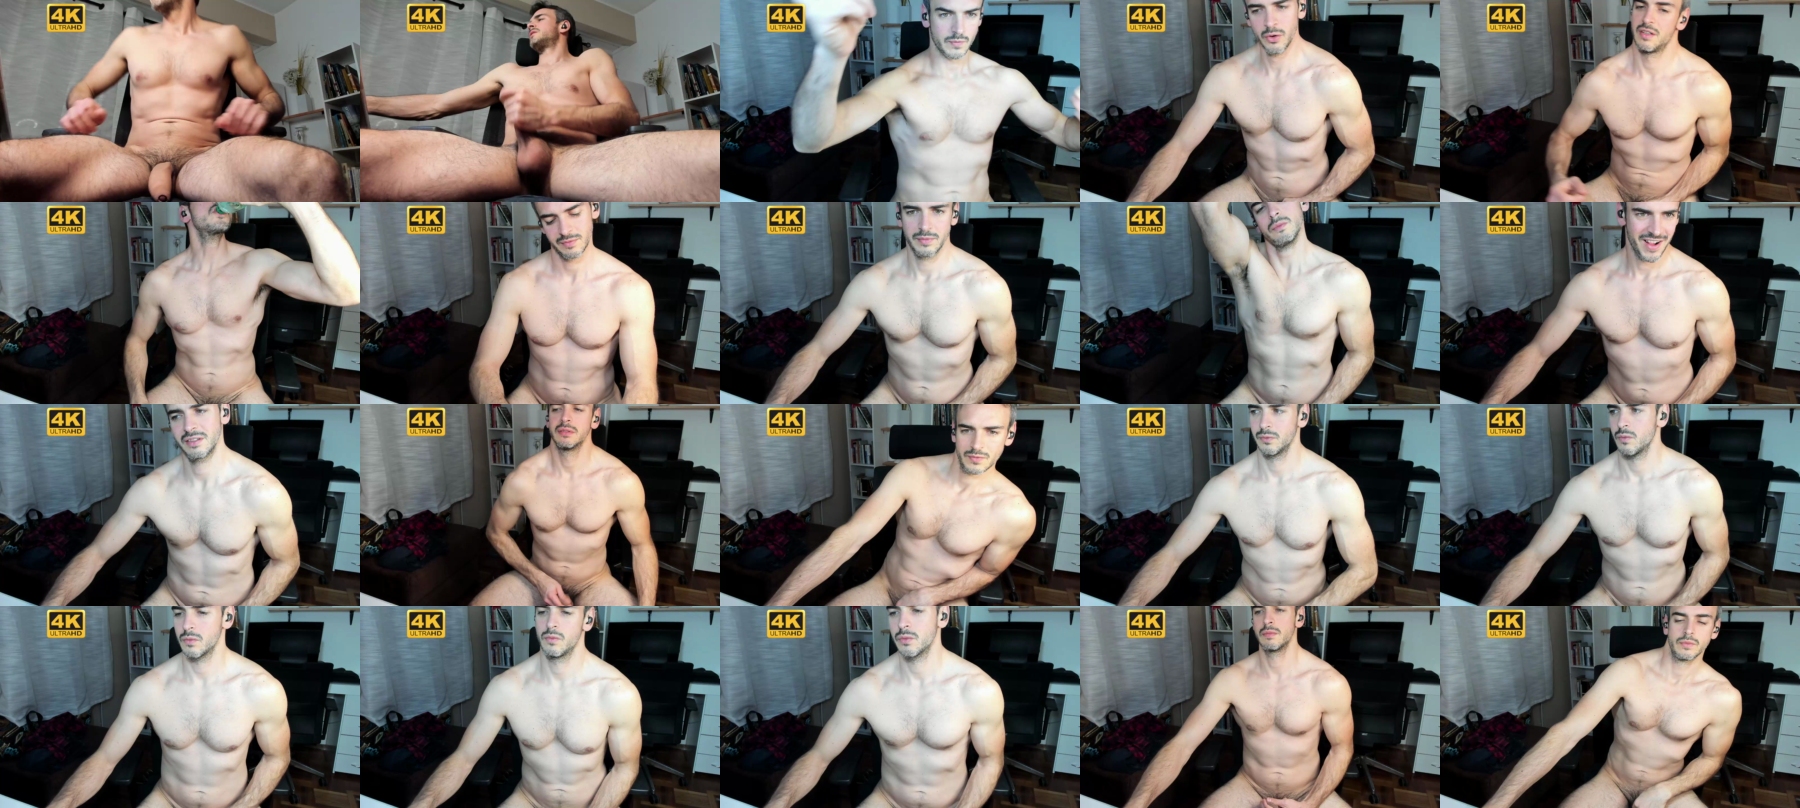 Hot_Martin25  20-08-2021 Male Topless